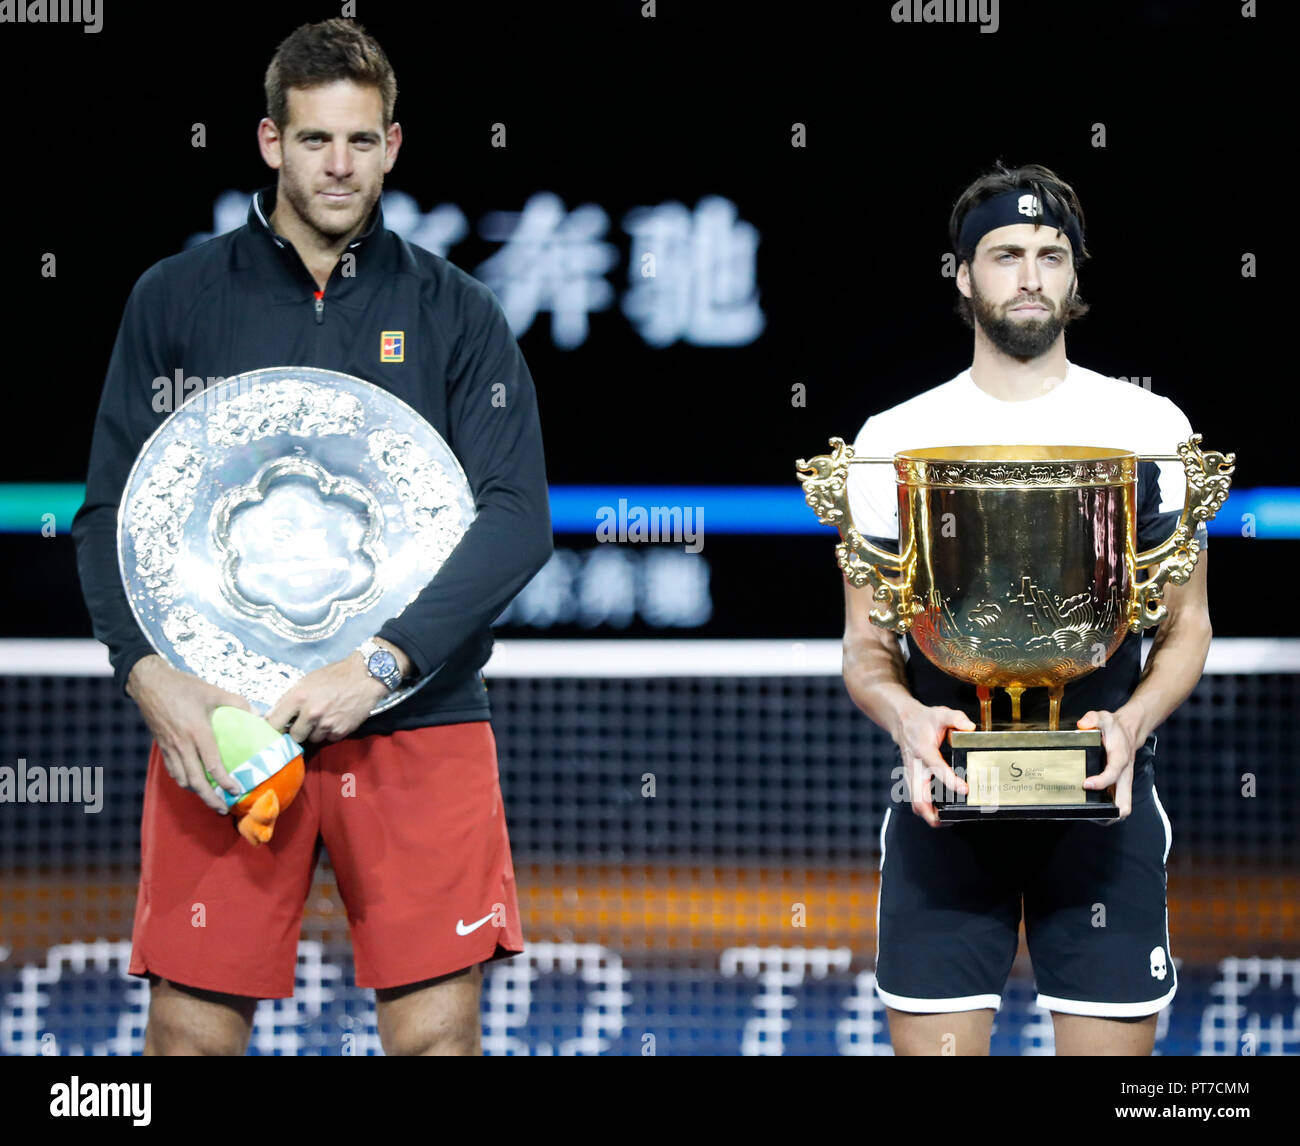 Beijing, China. 7th Oct, 2018. Winner Nikoloz Basilashvili (R) of Georgia  and runner-up Juan Martin del Potro of Argentina pose during the awarding  ceremony of the men's singles event at the China